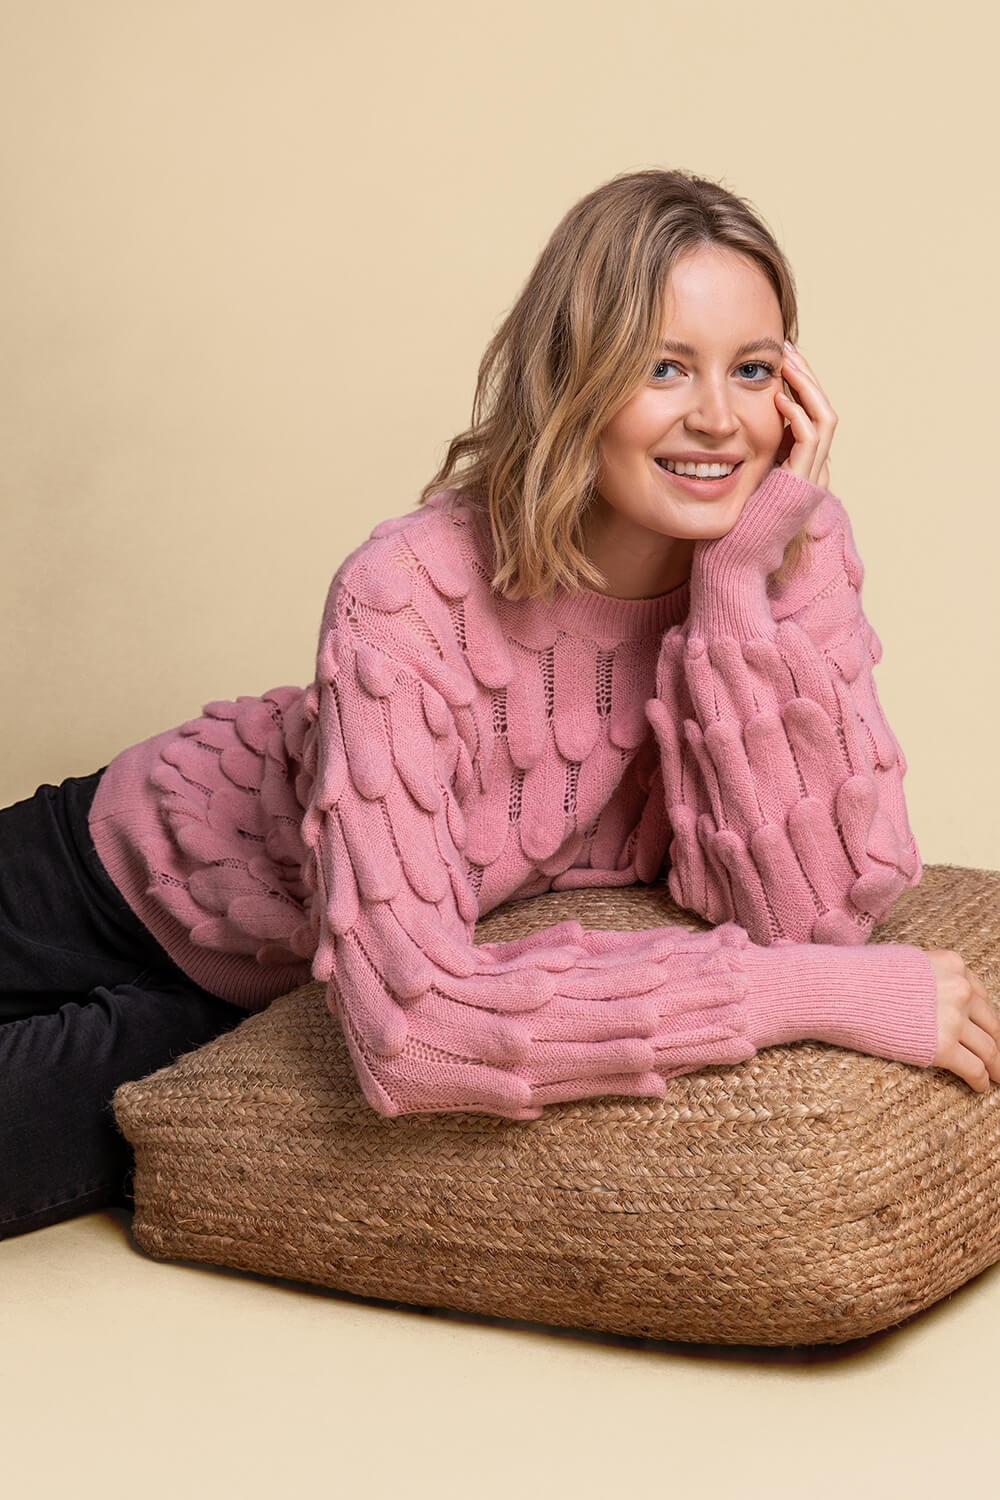 Rose Scallop Textured Knit Jumper, Image 5 of 5